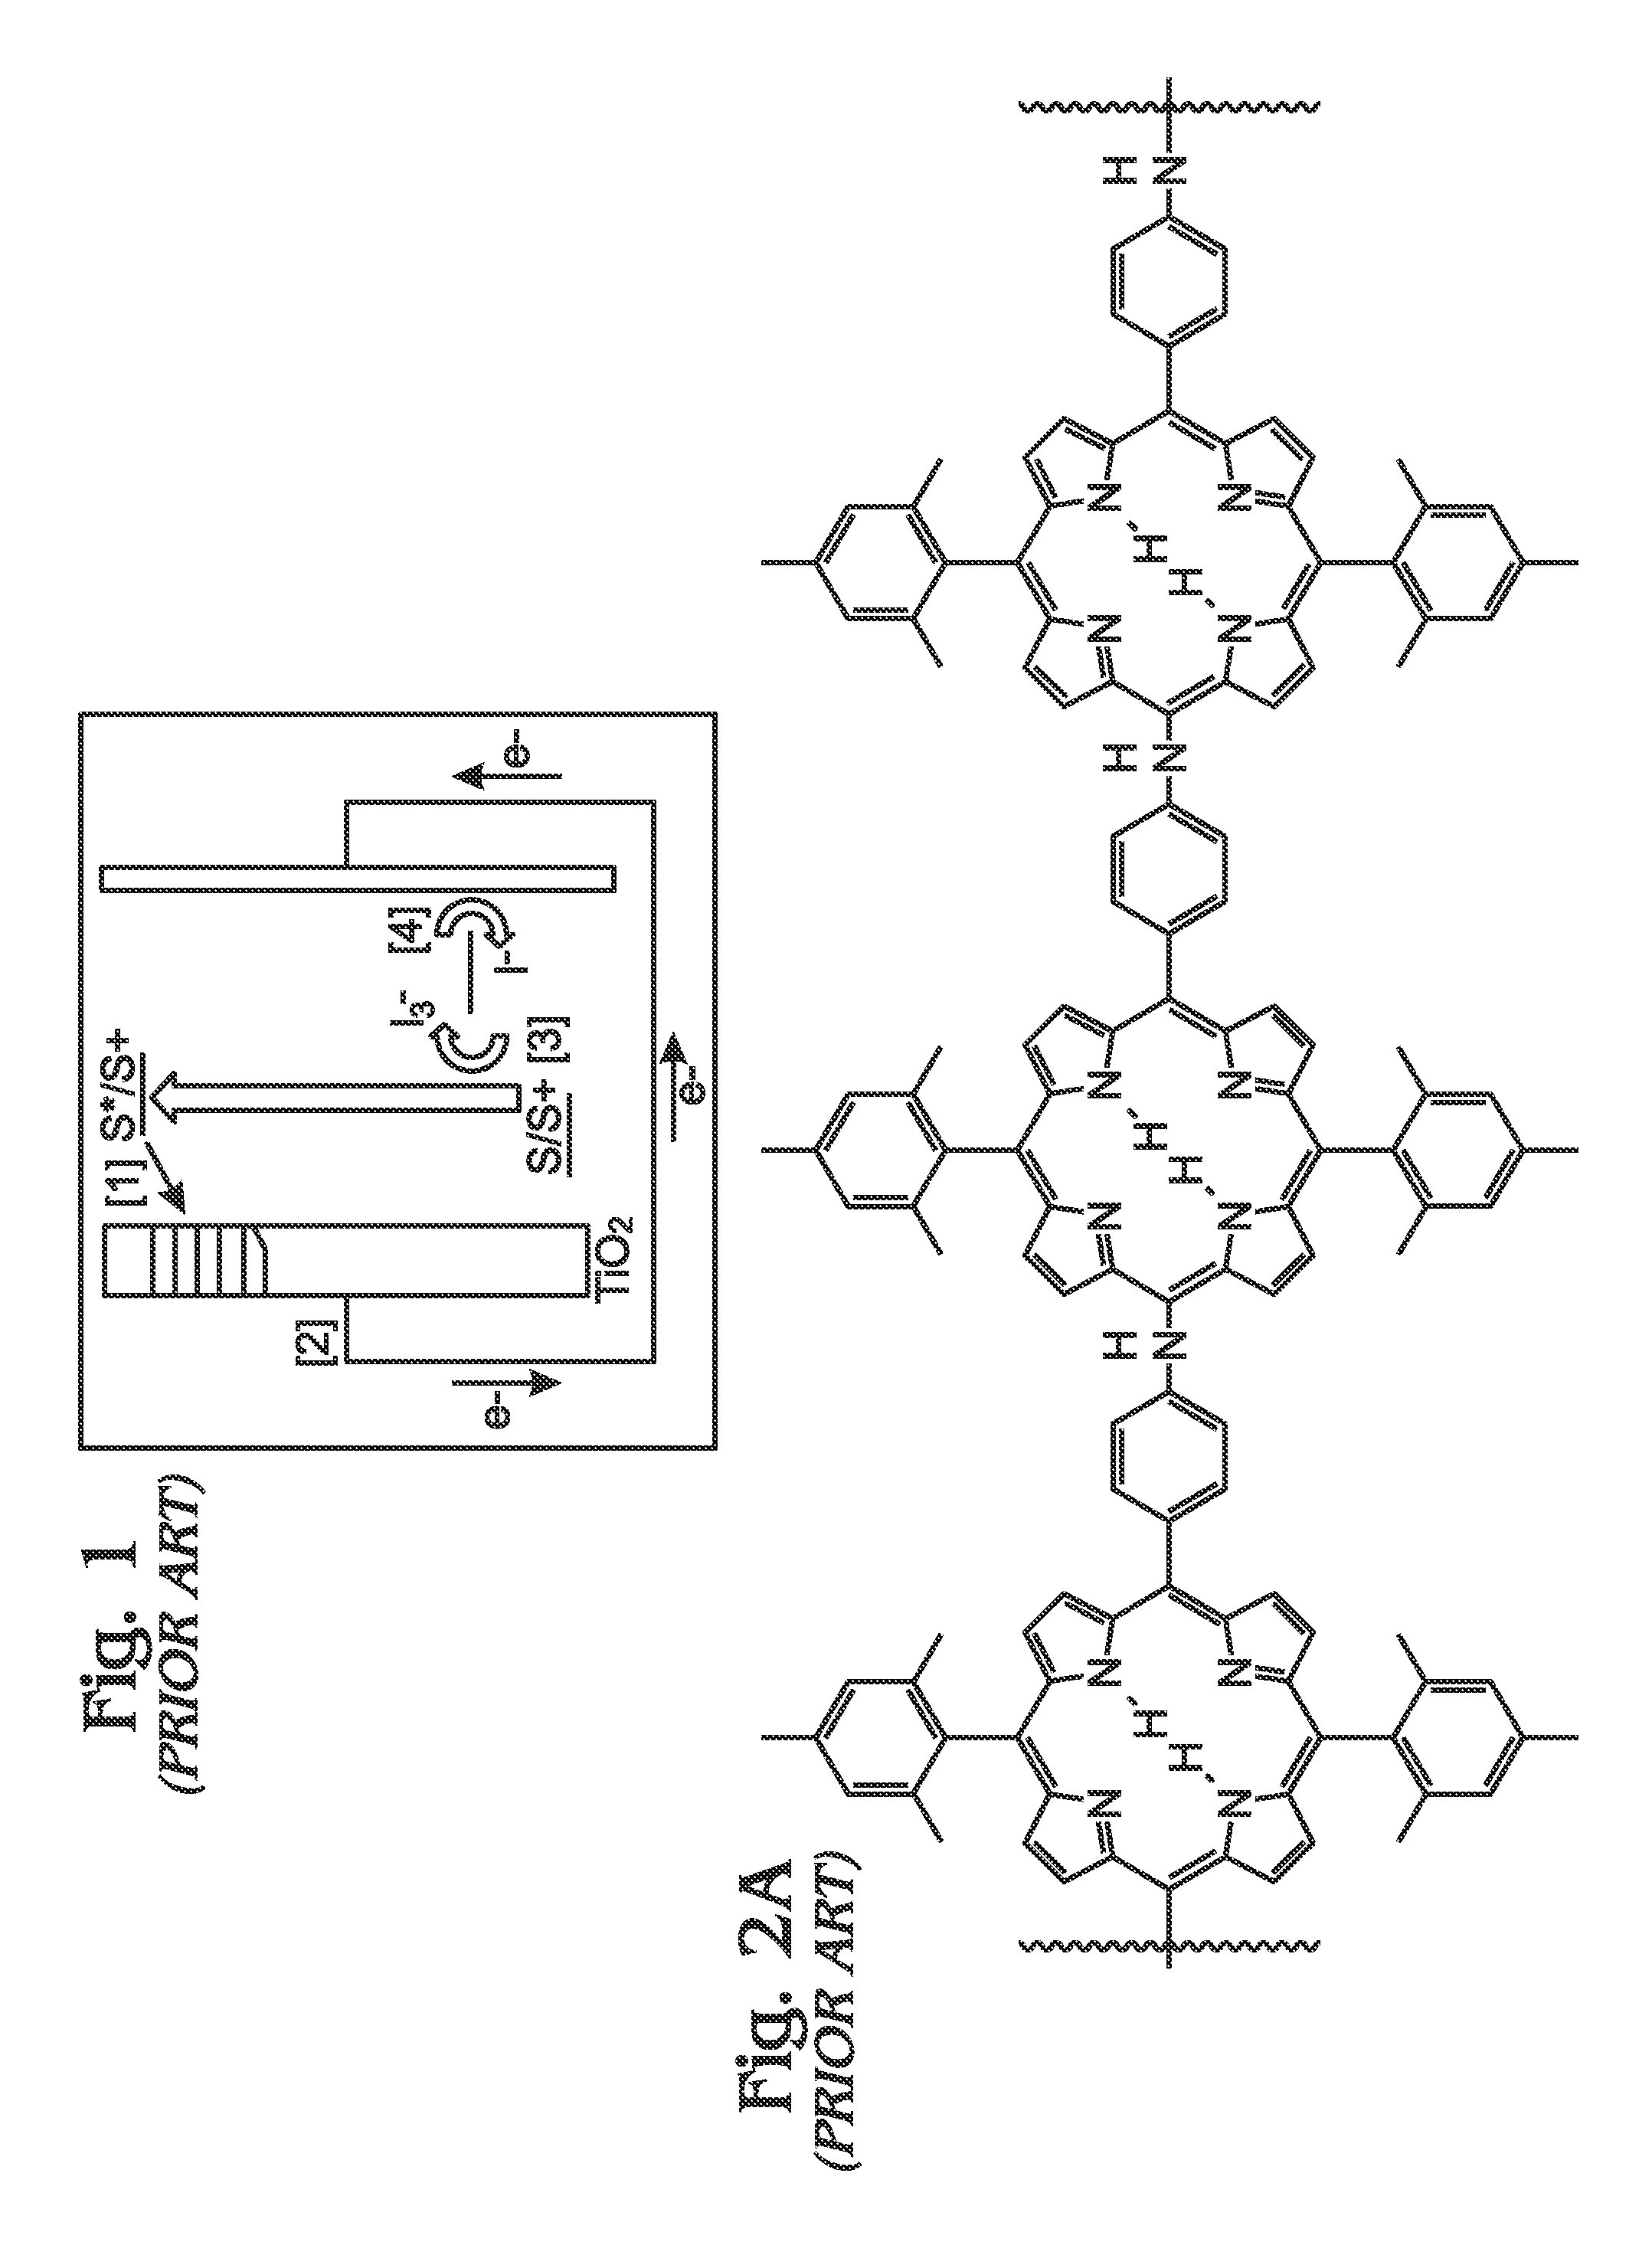 Metalloporphyrin Polymer Functionalized Substrate